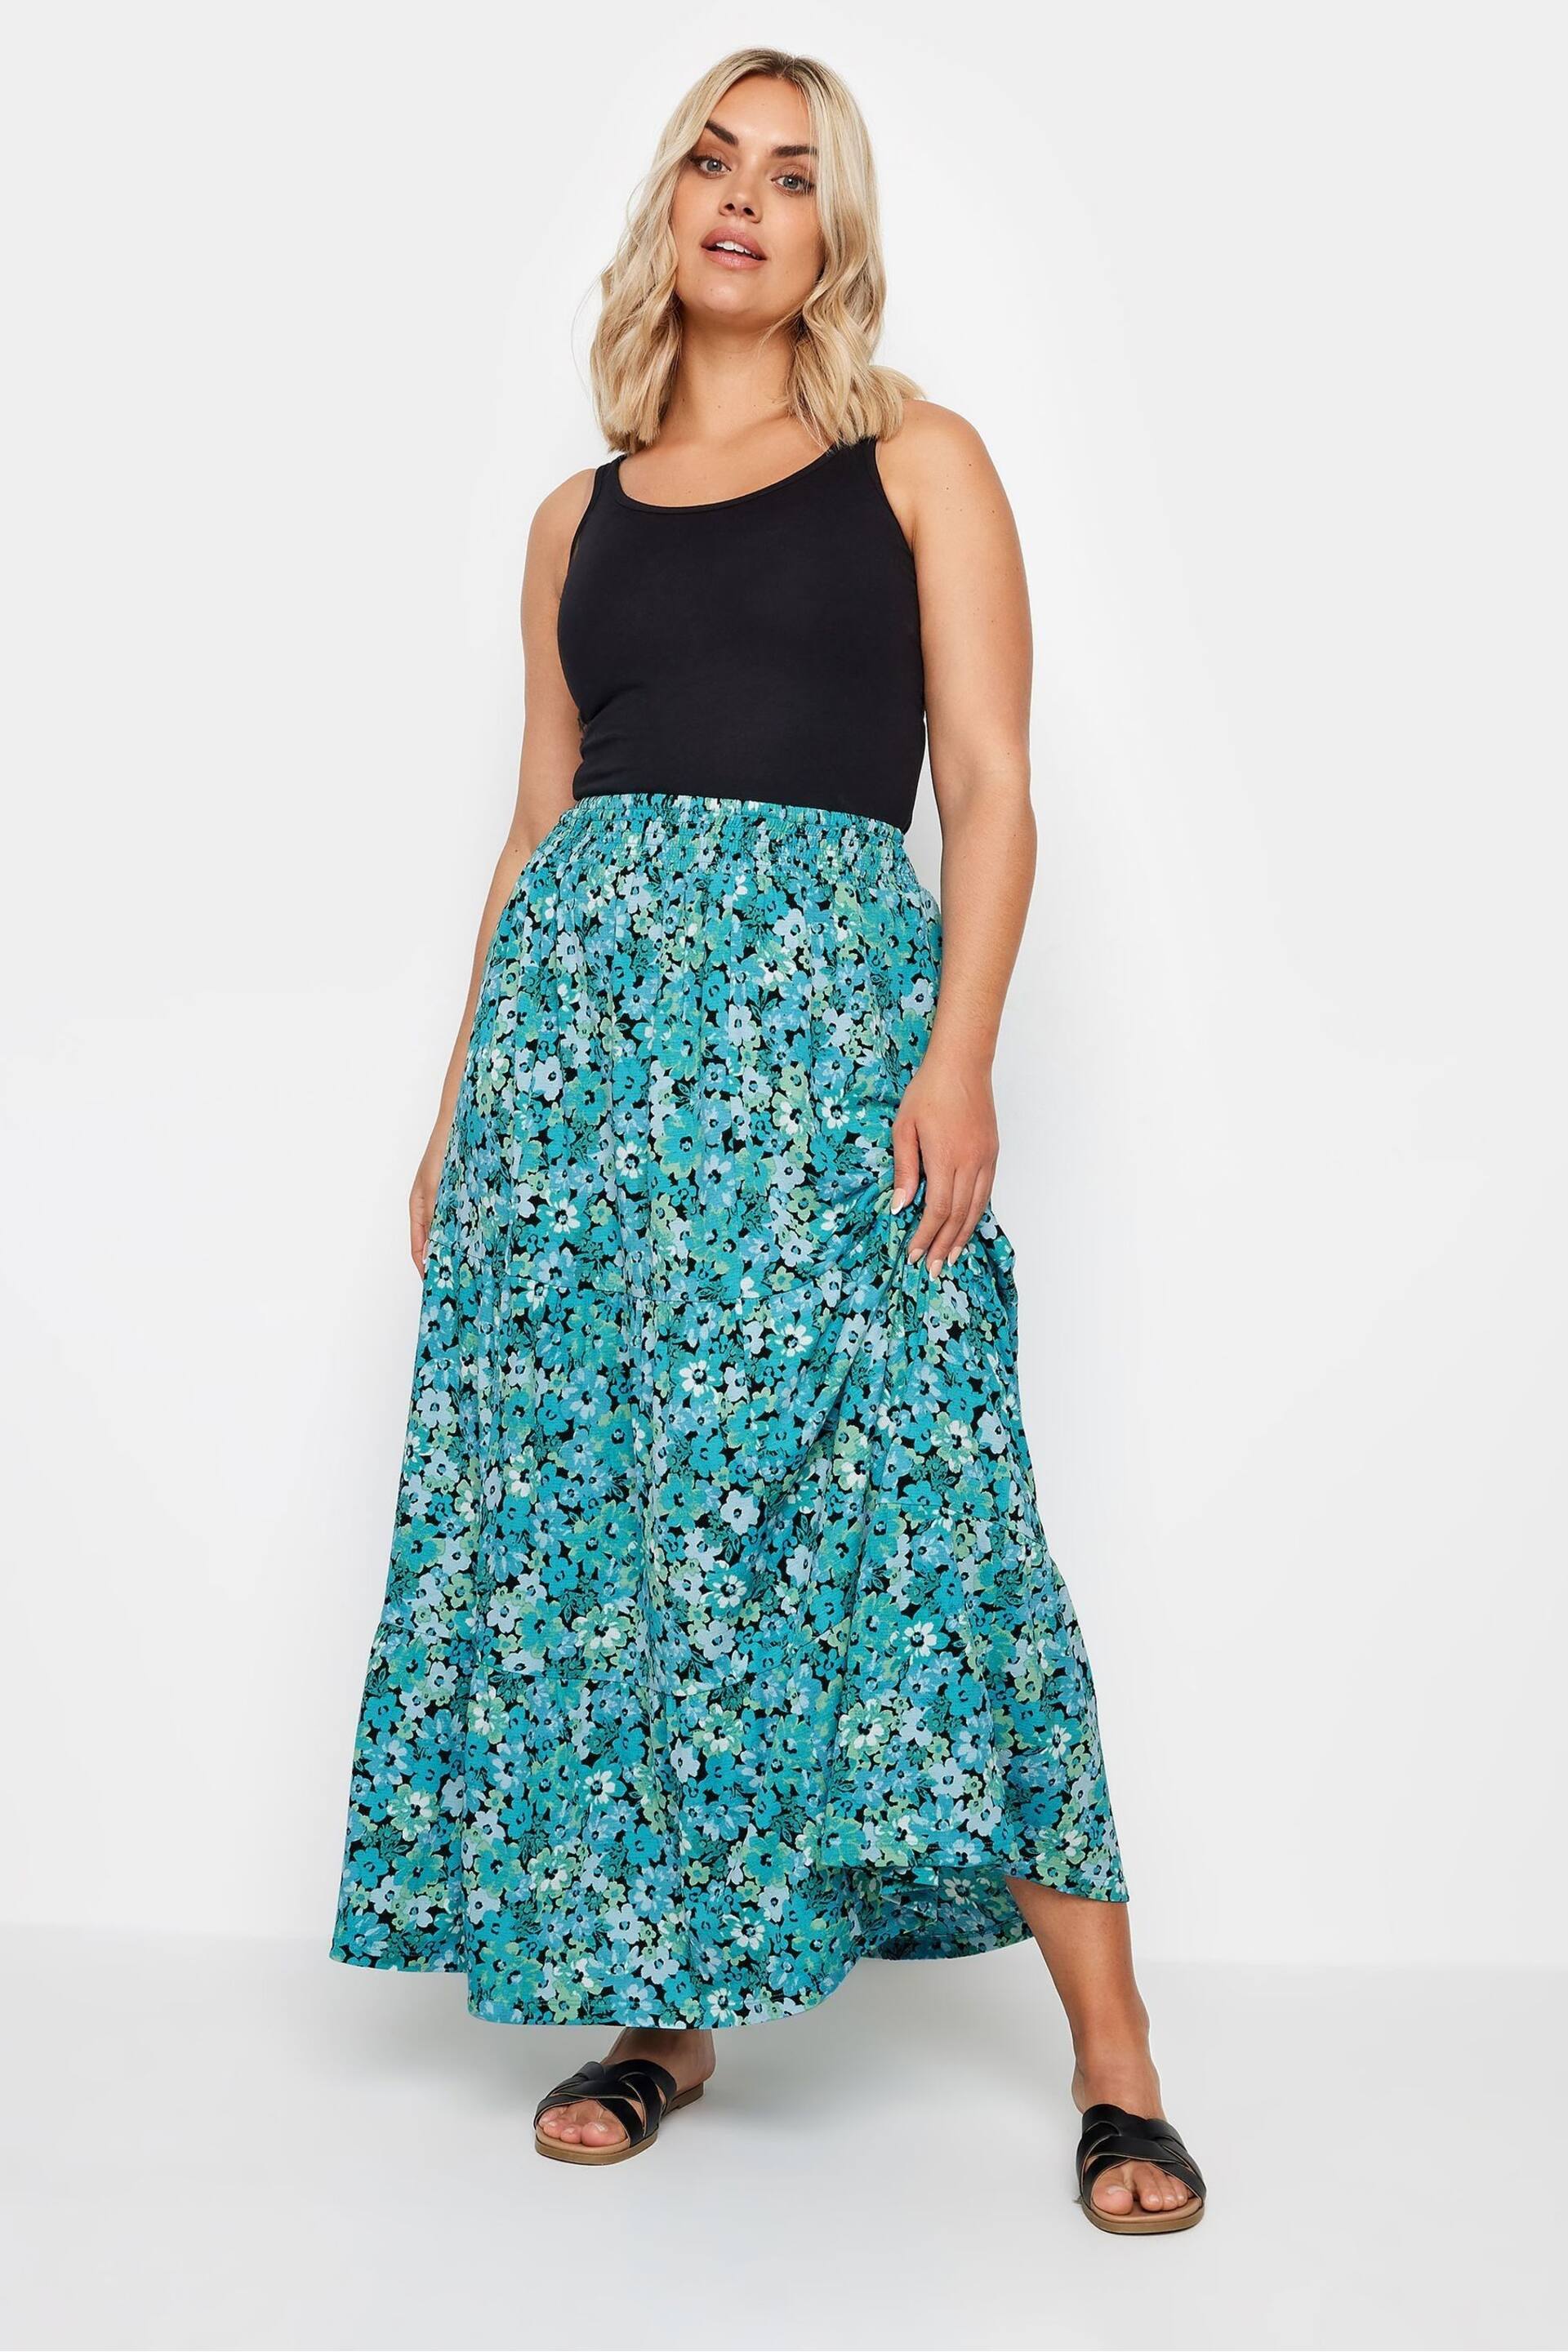 Yours Curve Blue Floral Print Textured Tiered Maxi Skirt - Image 1 of 4